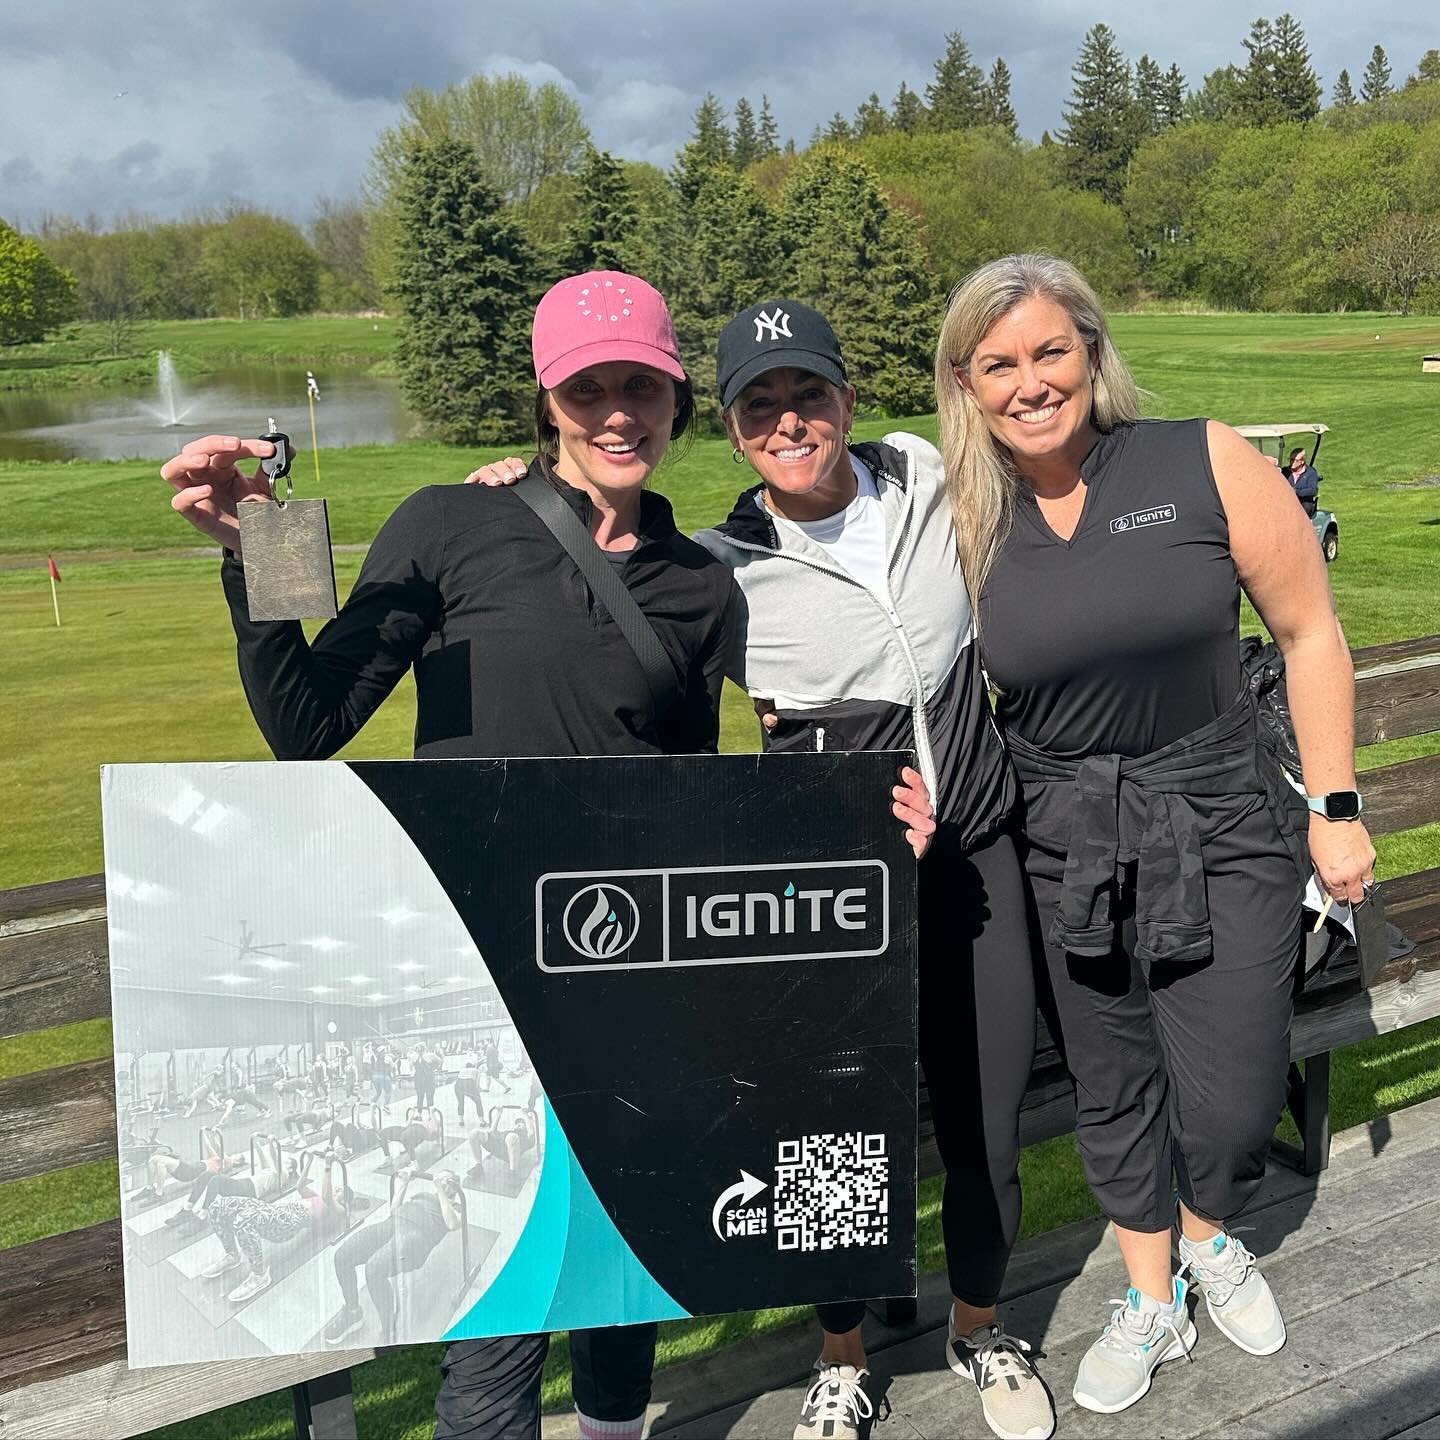 We love having the ladies back on the course for Ladies League. Rain or shine they show up and are out on the course having fun! 

We are thrilled to have @ignitecobourg back as our sponsor! 

☎️ Restaurant 905-377-8177
⛳️ Link for our online &lsquo;